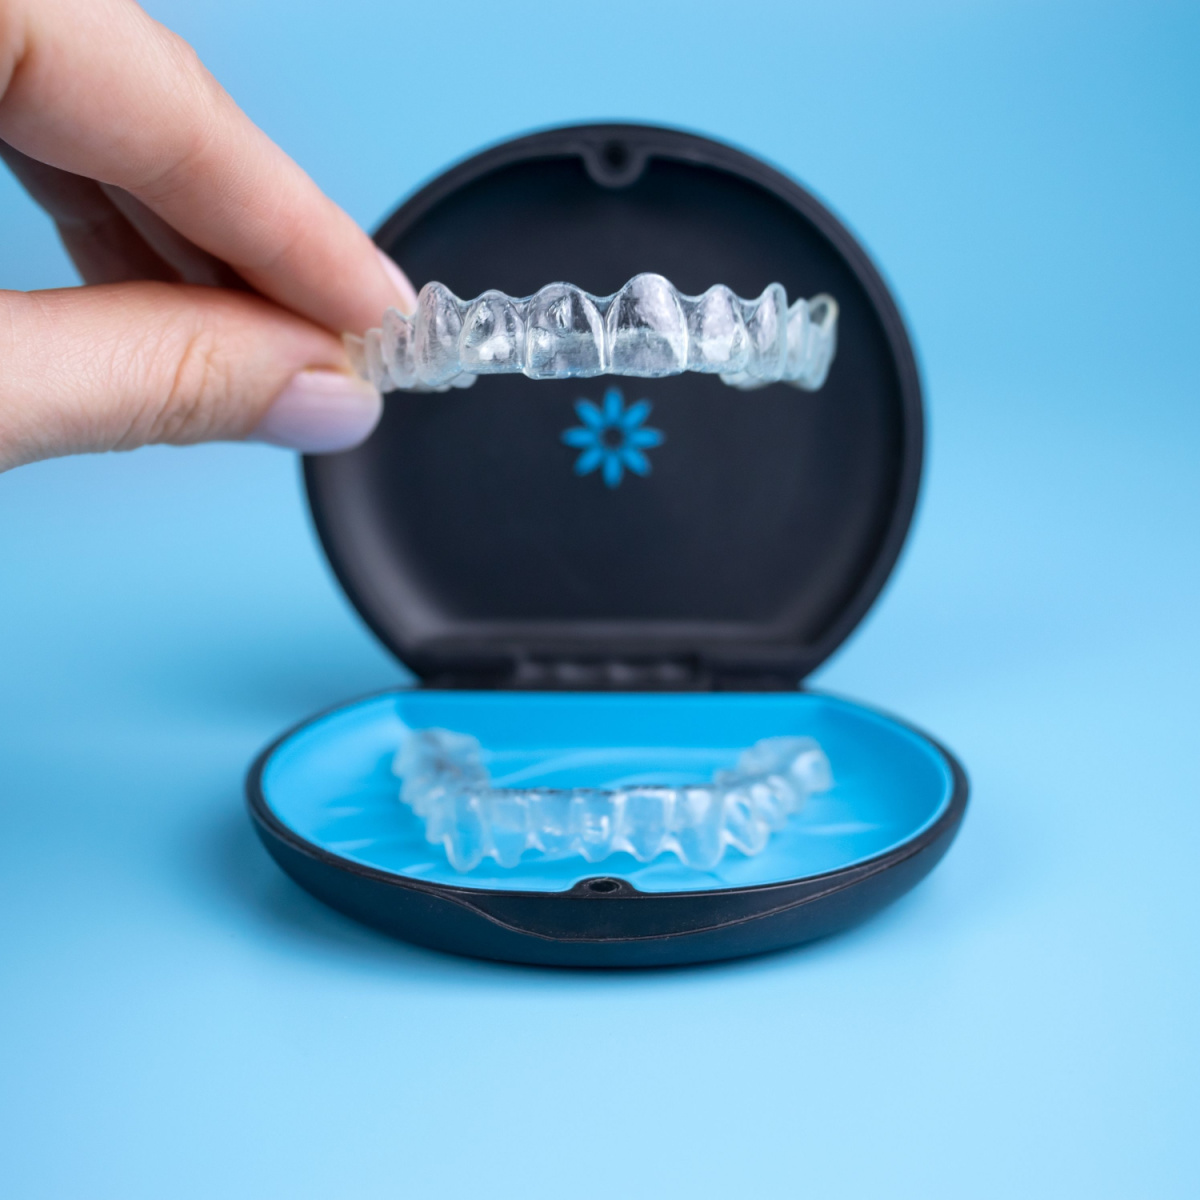 Answering South Houston Invisalign FAQs